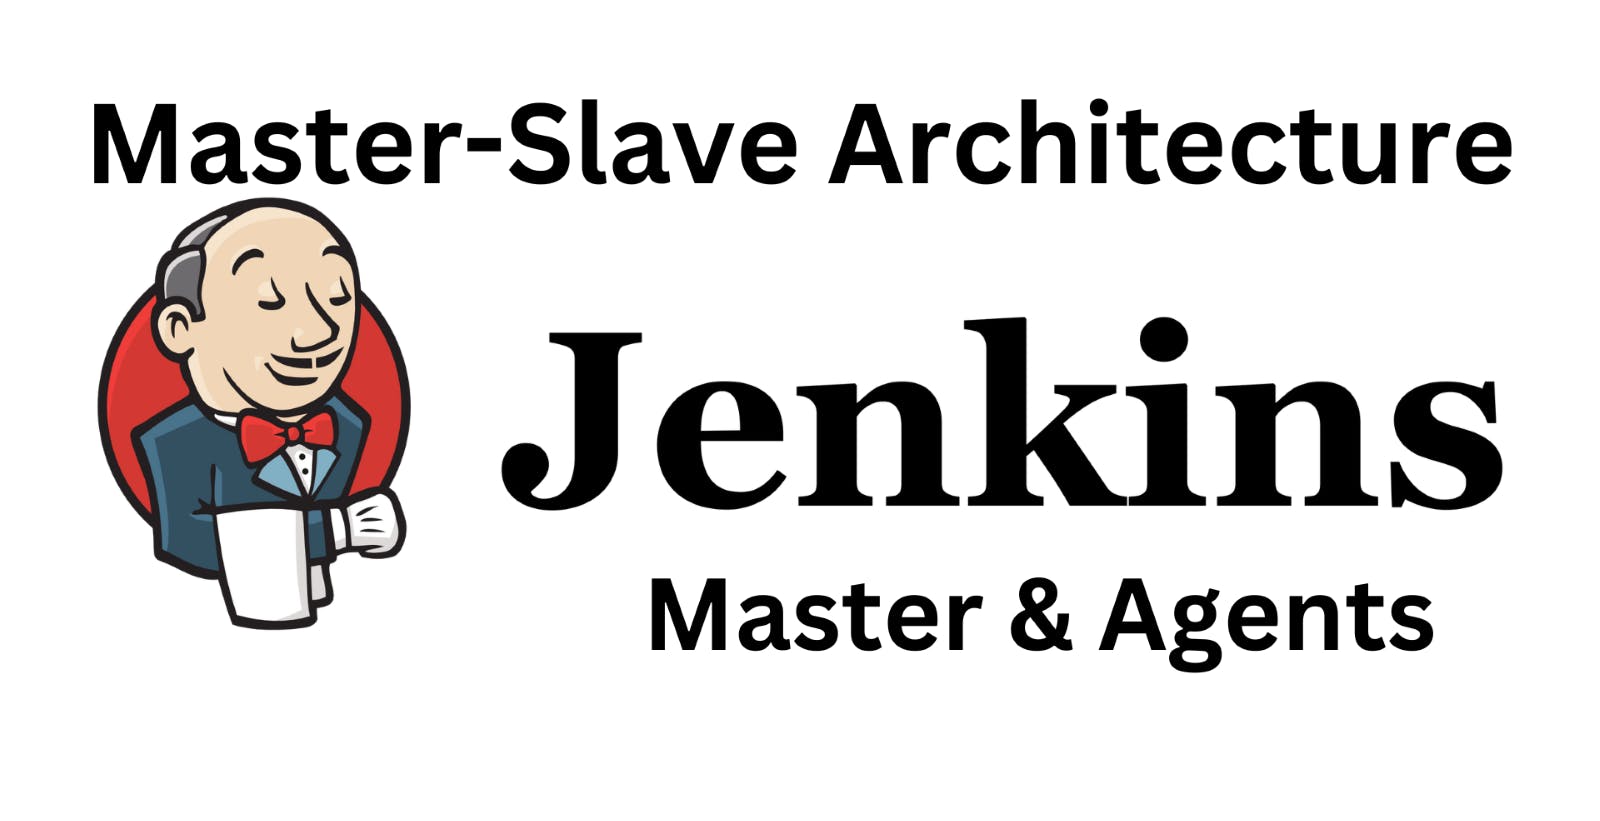 Efficient CI/CD with Jenkins: Exploring Master-Slave Architecture and Agents